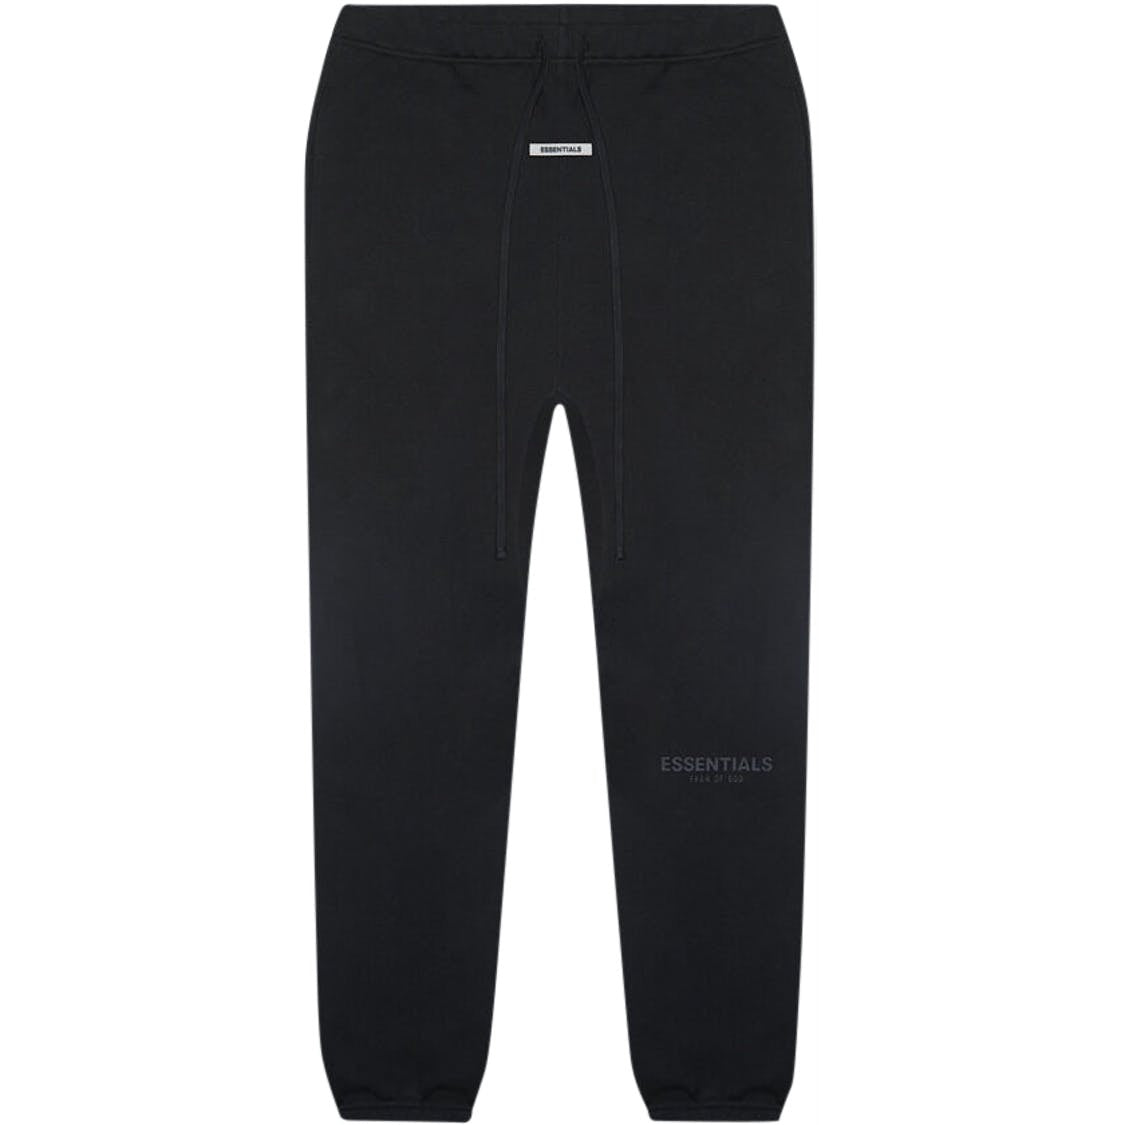 FOG Essentials - limo black sweatpants (SS20) - Centrall Online